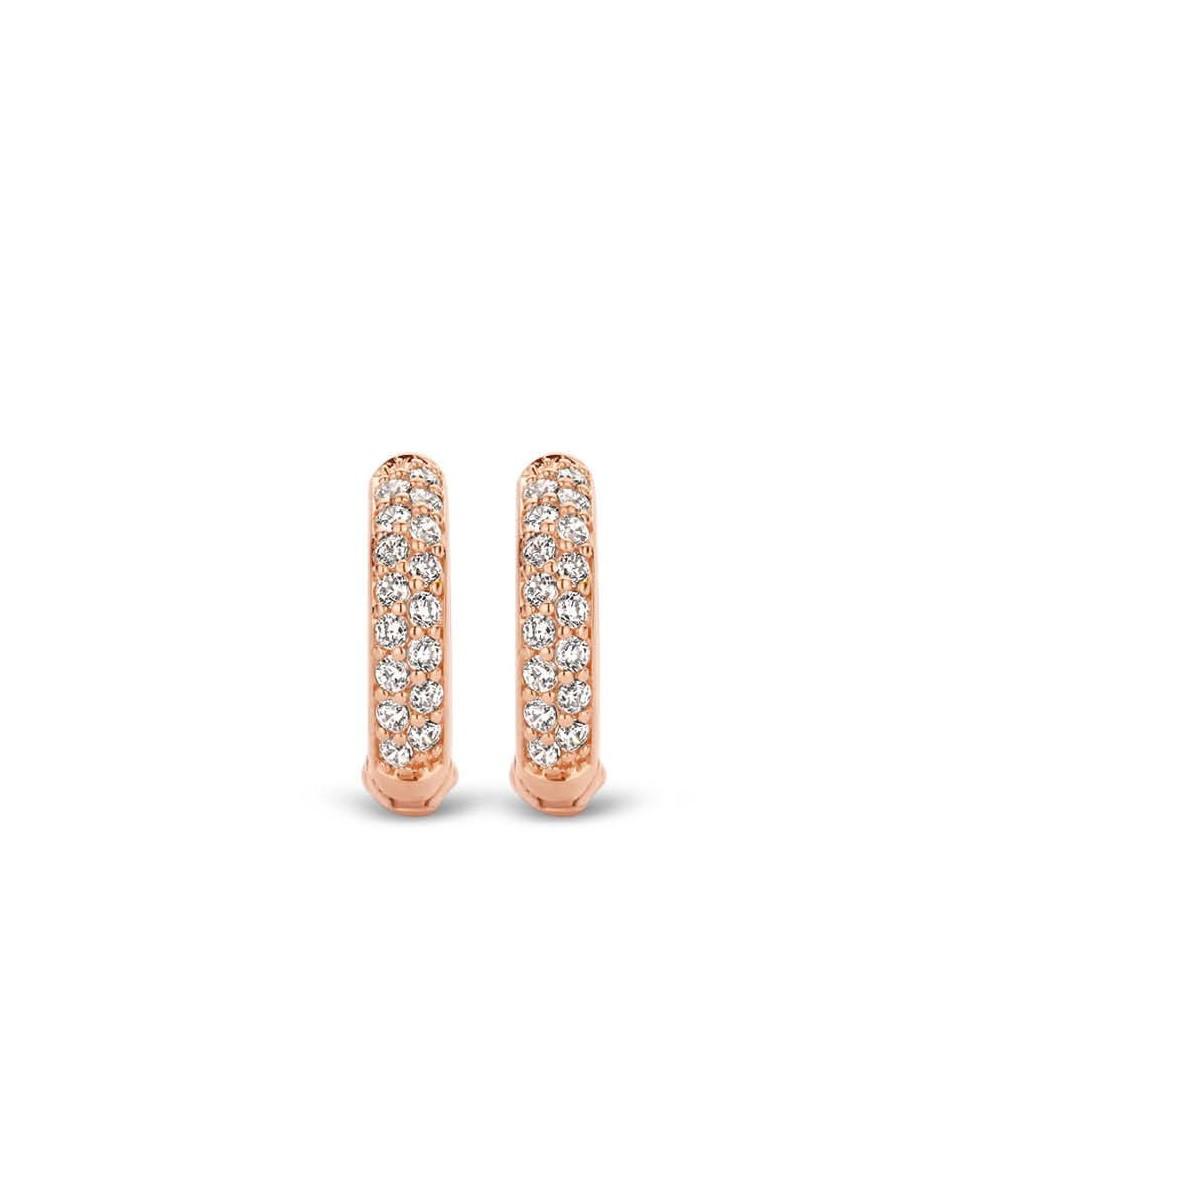 TI SENTO ROSE GOLD-PLATED SILVER EARRINGS 7210ZR